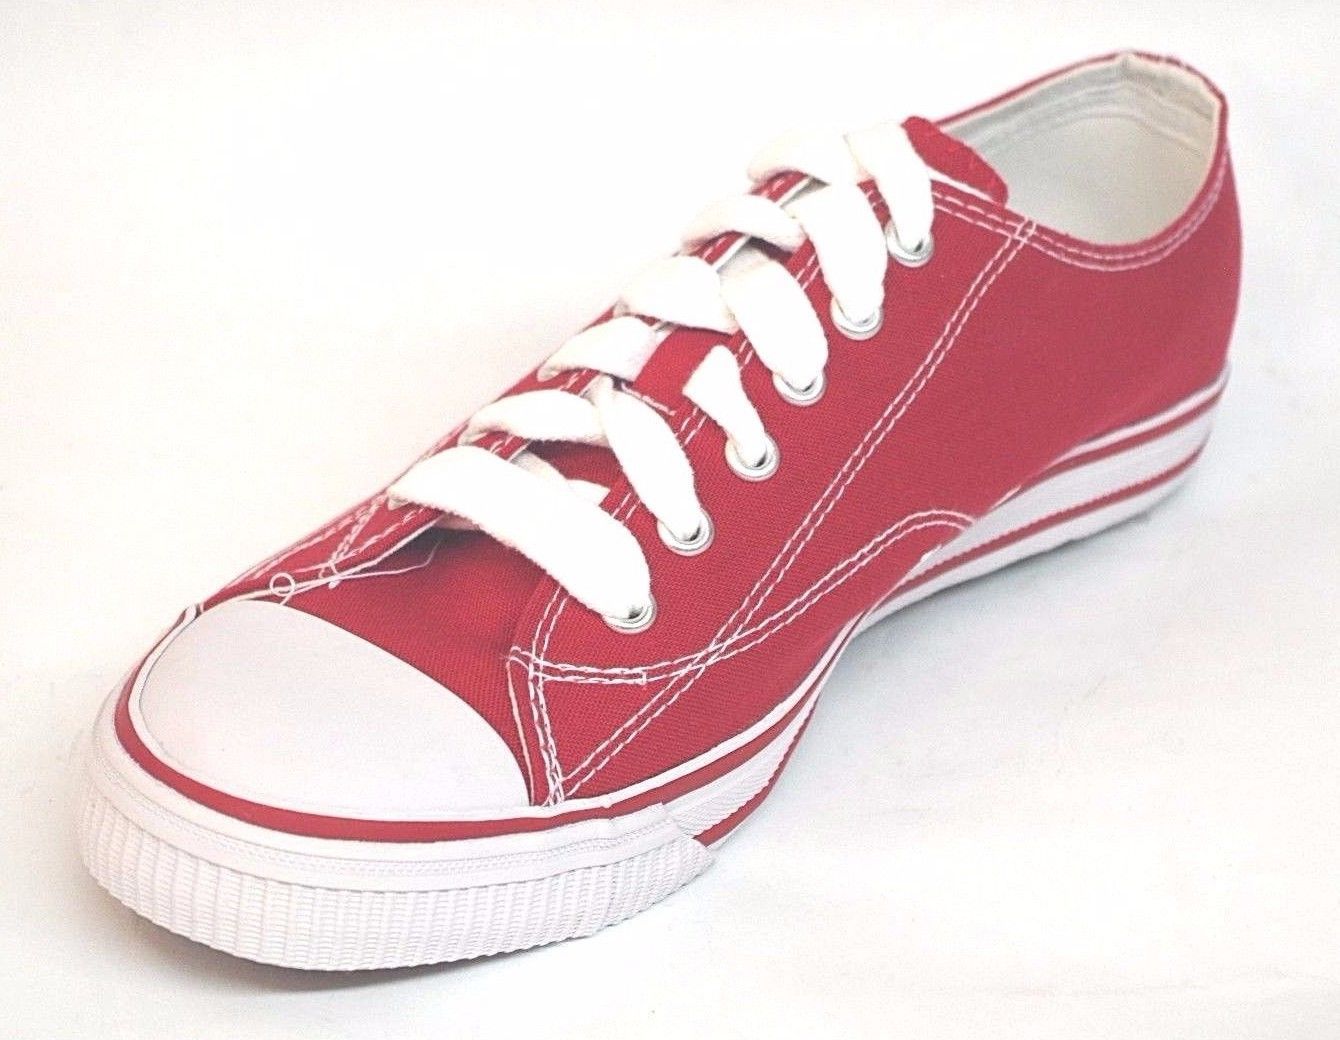 women's red tennis shoes